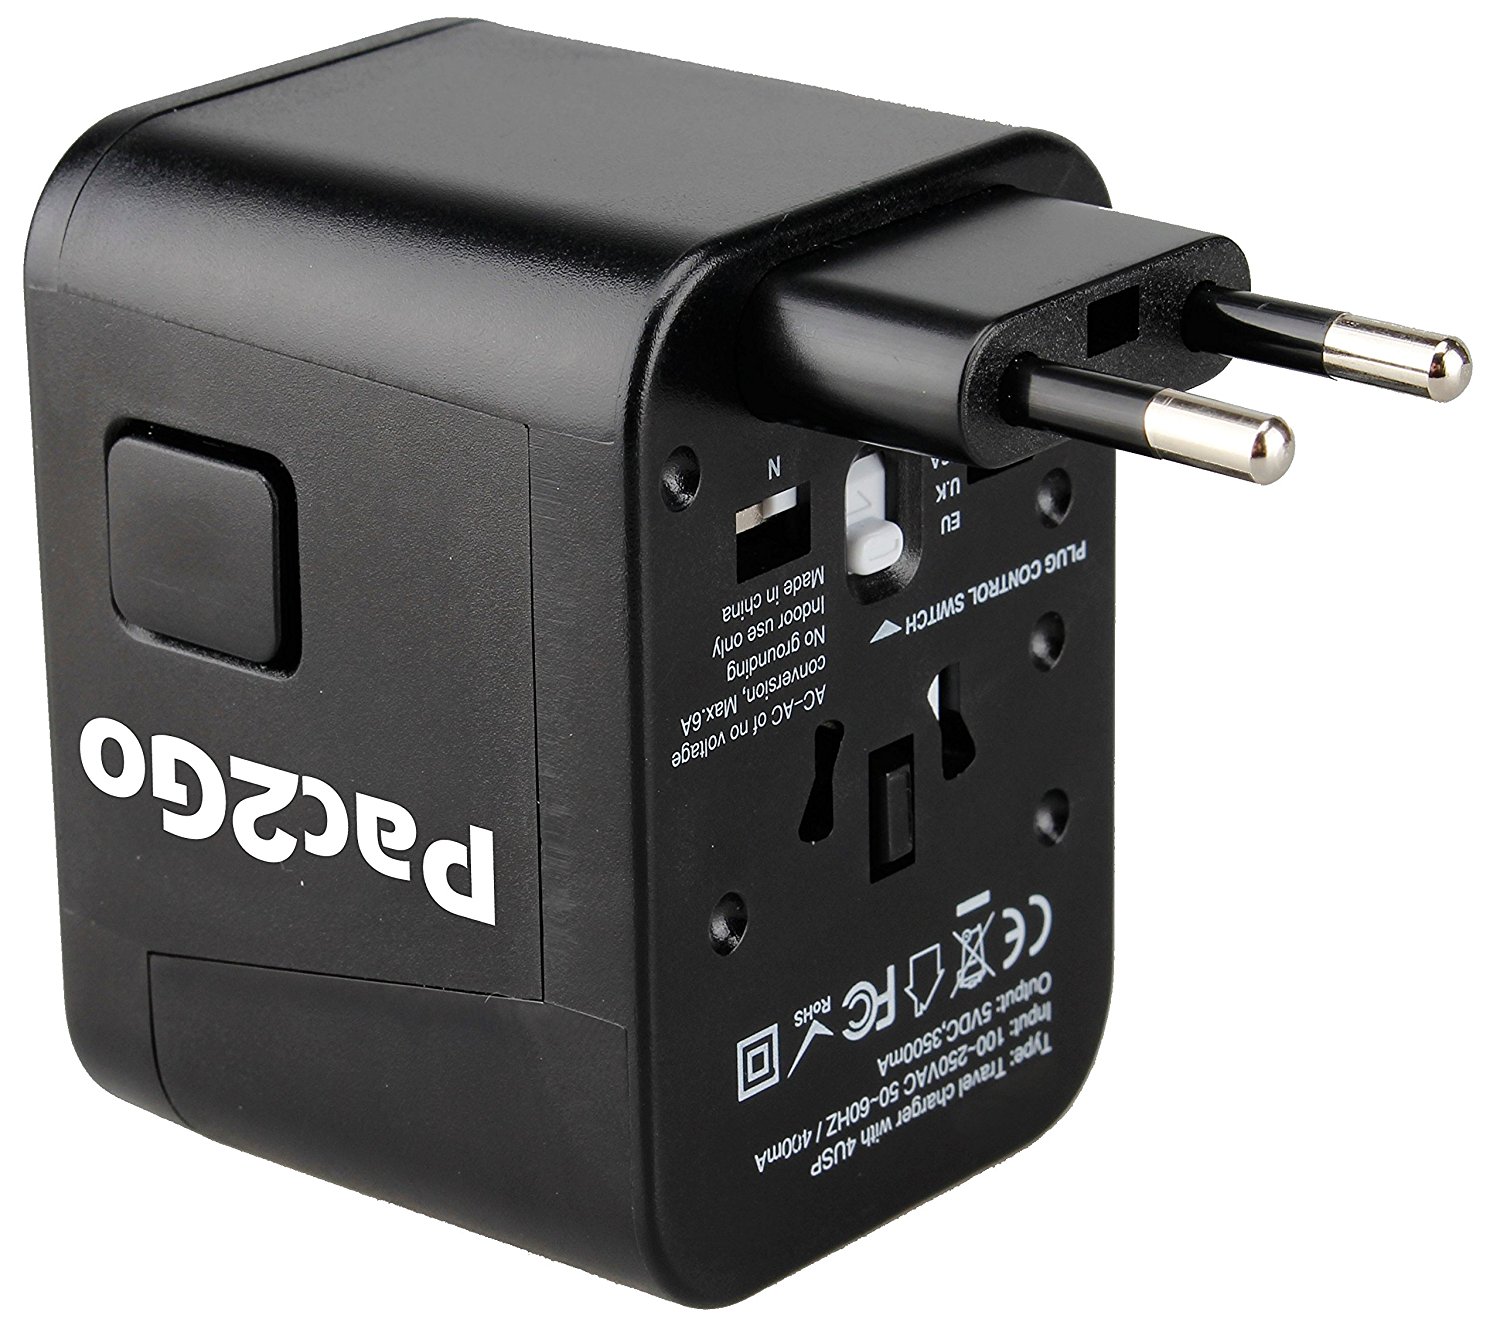 US to EU/UK/AU Charger Switch Adapter for Travel